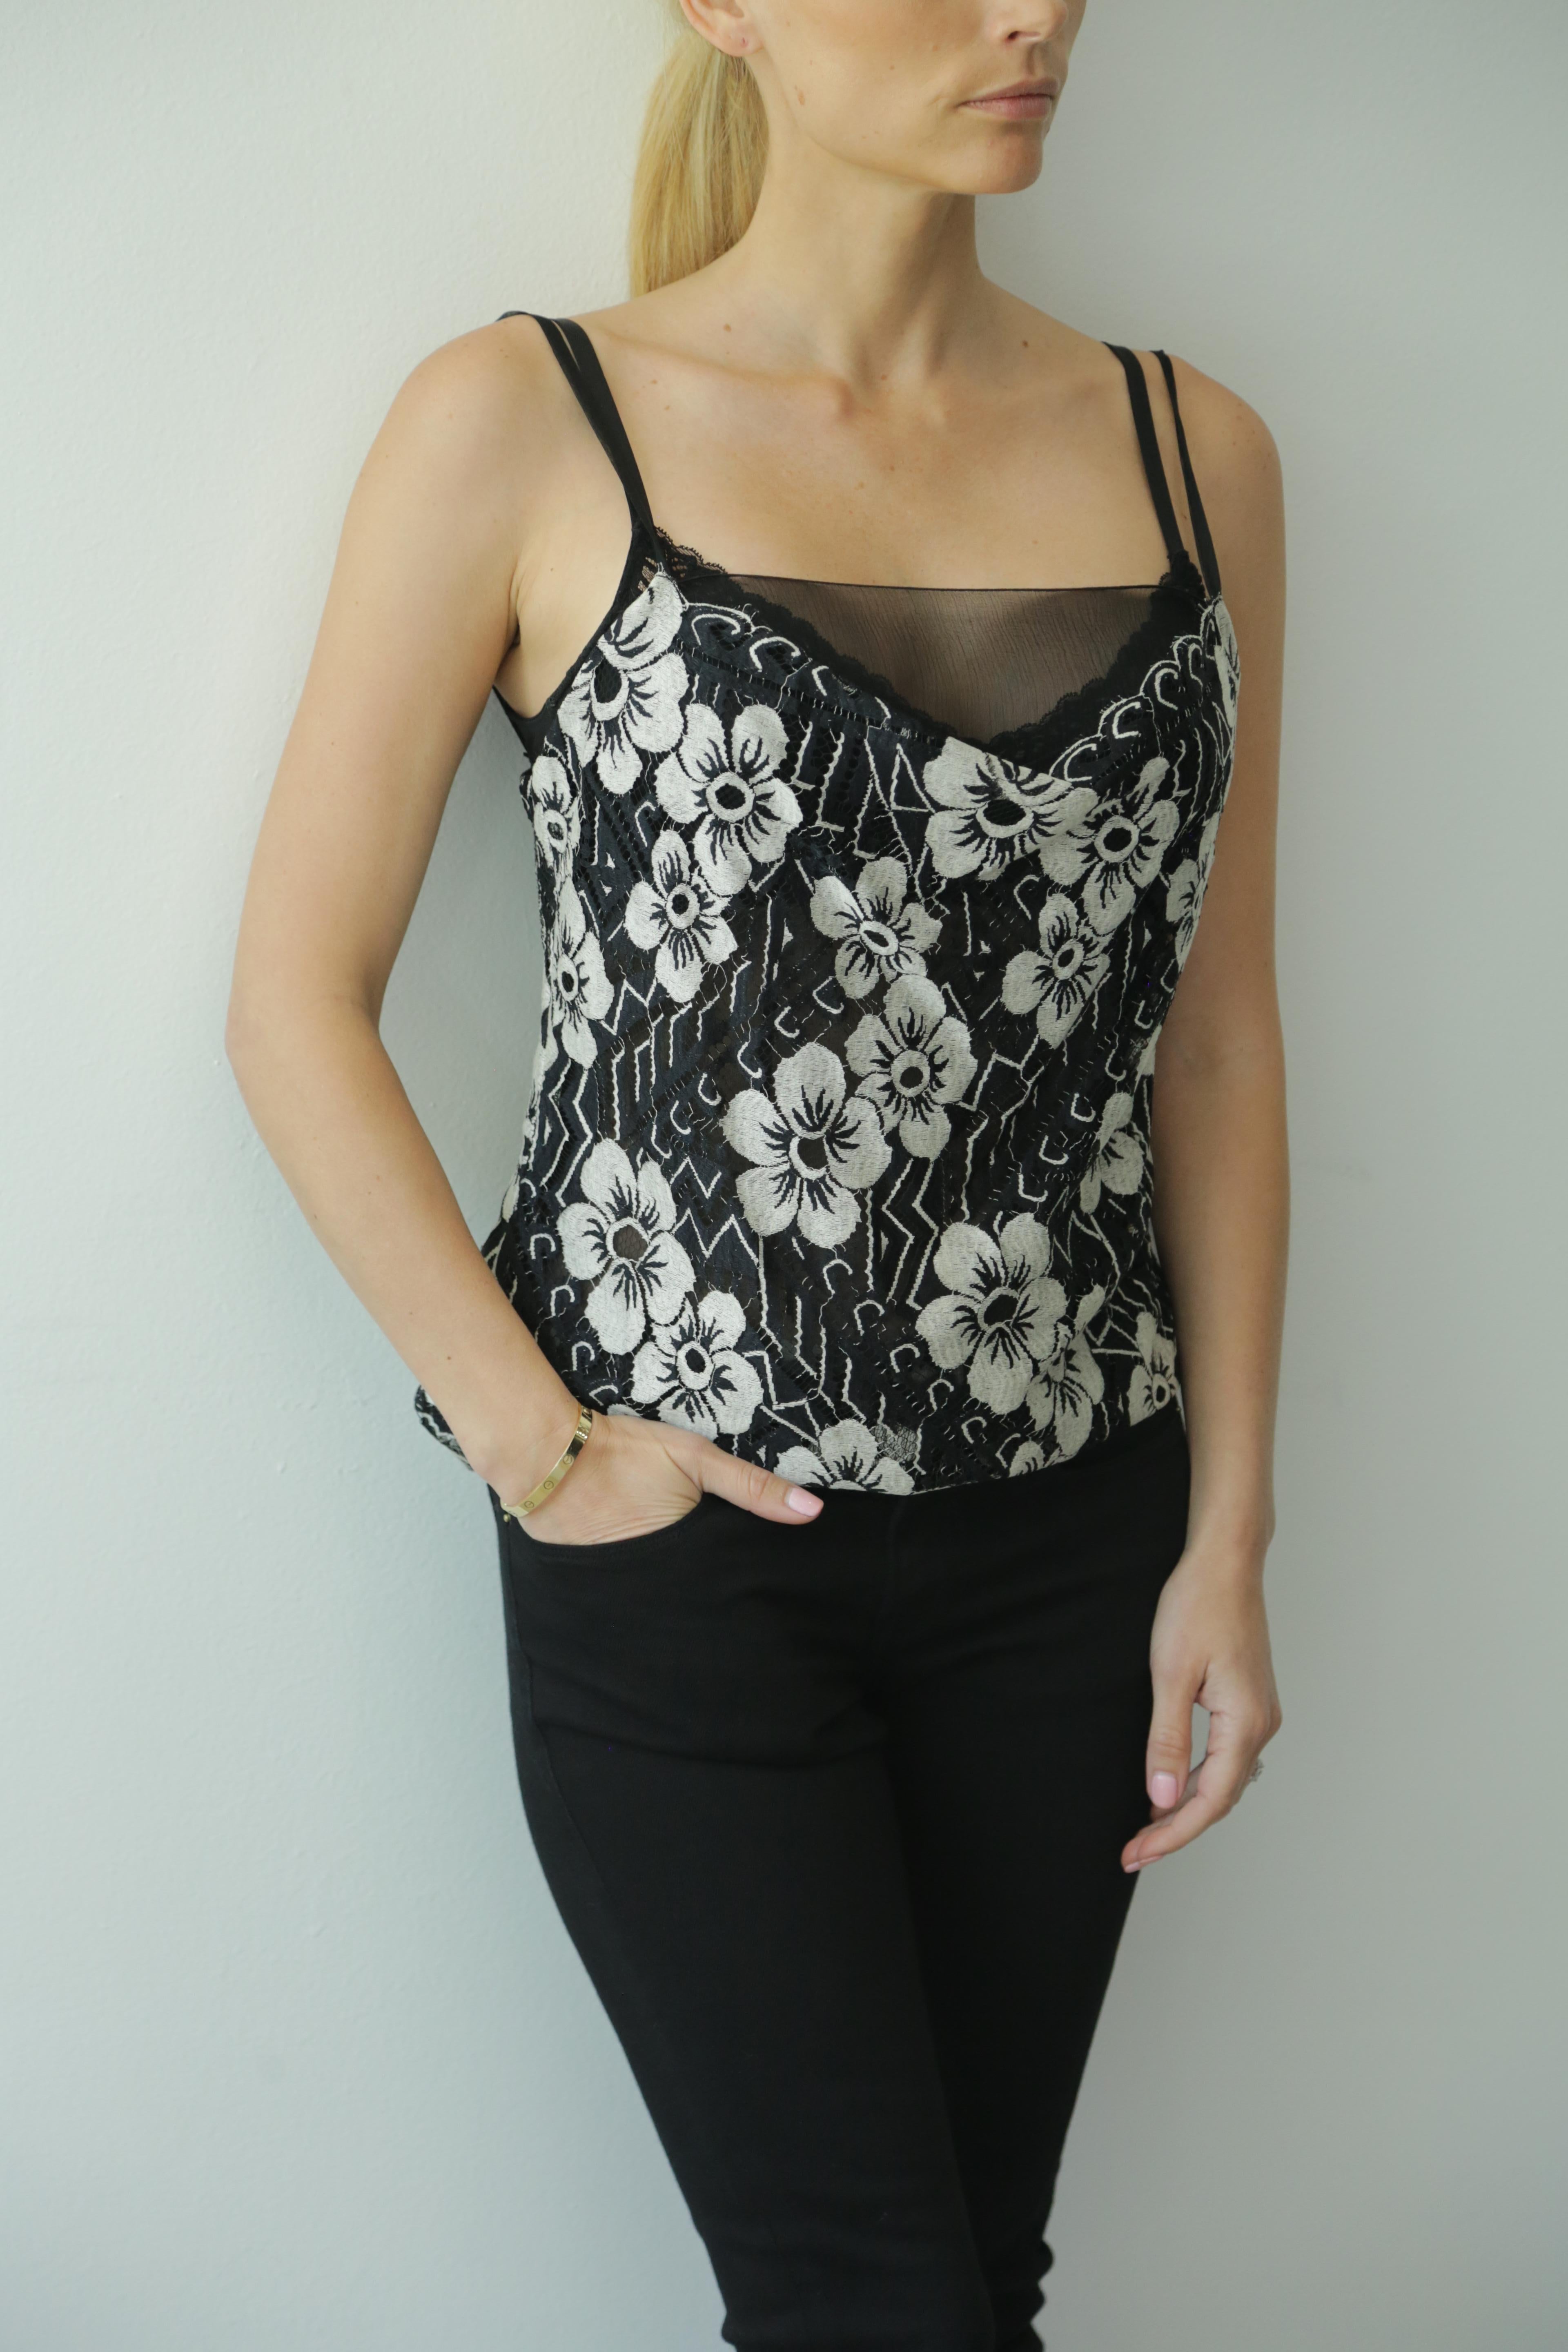 Chanel black and white floral lace camisole. 
Backside Chanel logo buttons.
A Beautiful camisole to be worn by itself of under a blazer or cardigan. 

67% polyamide nylon, 33% cotton. Lining 100% silk.

Mint Condition. 
Size 40 (fits smaller) (like